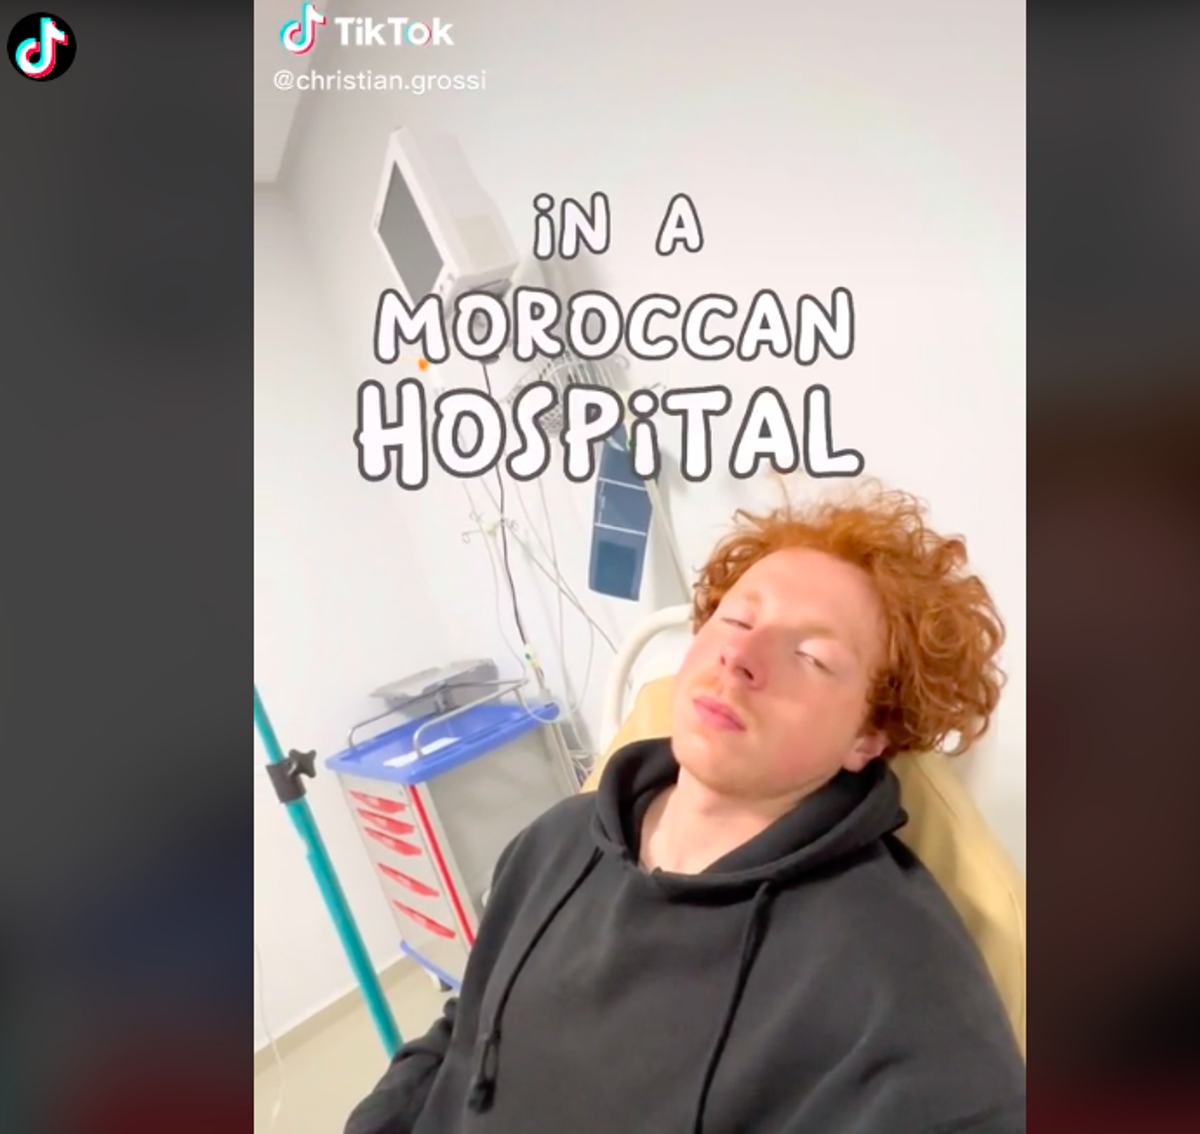 Christian Grossi, 23, fell ill while travelling in Morocco and was left stunned by the medical bill he was handed for an overnight stay at a hospital in the North African country. (TikTok/@Christian.grossi)